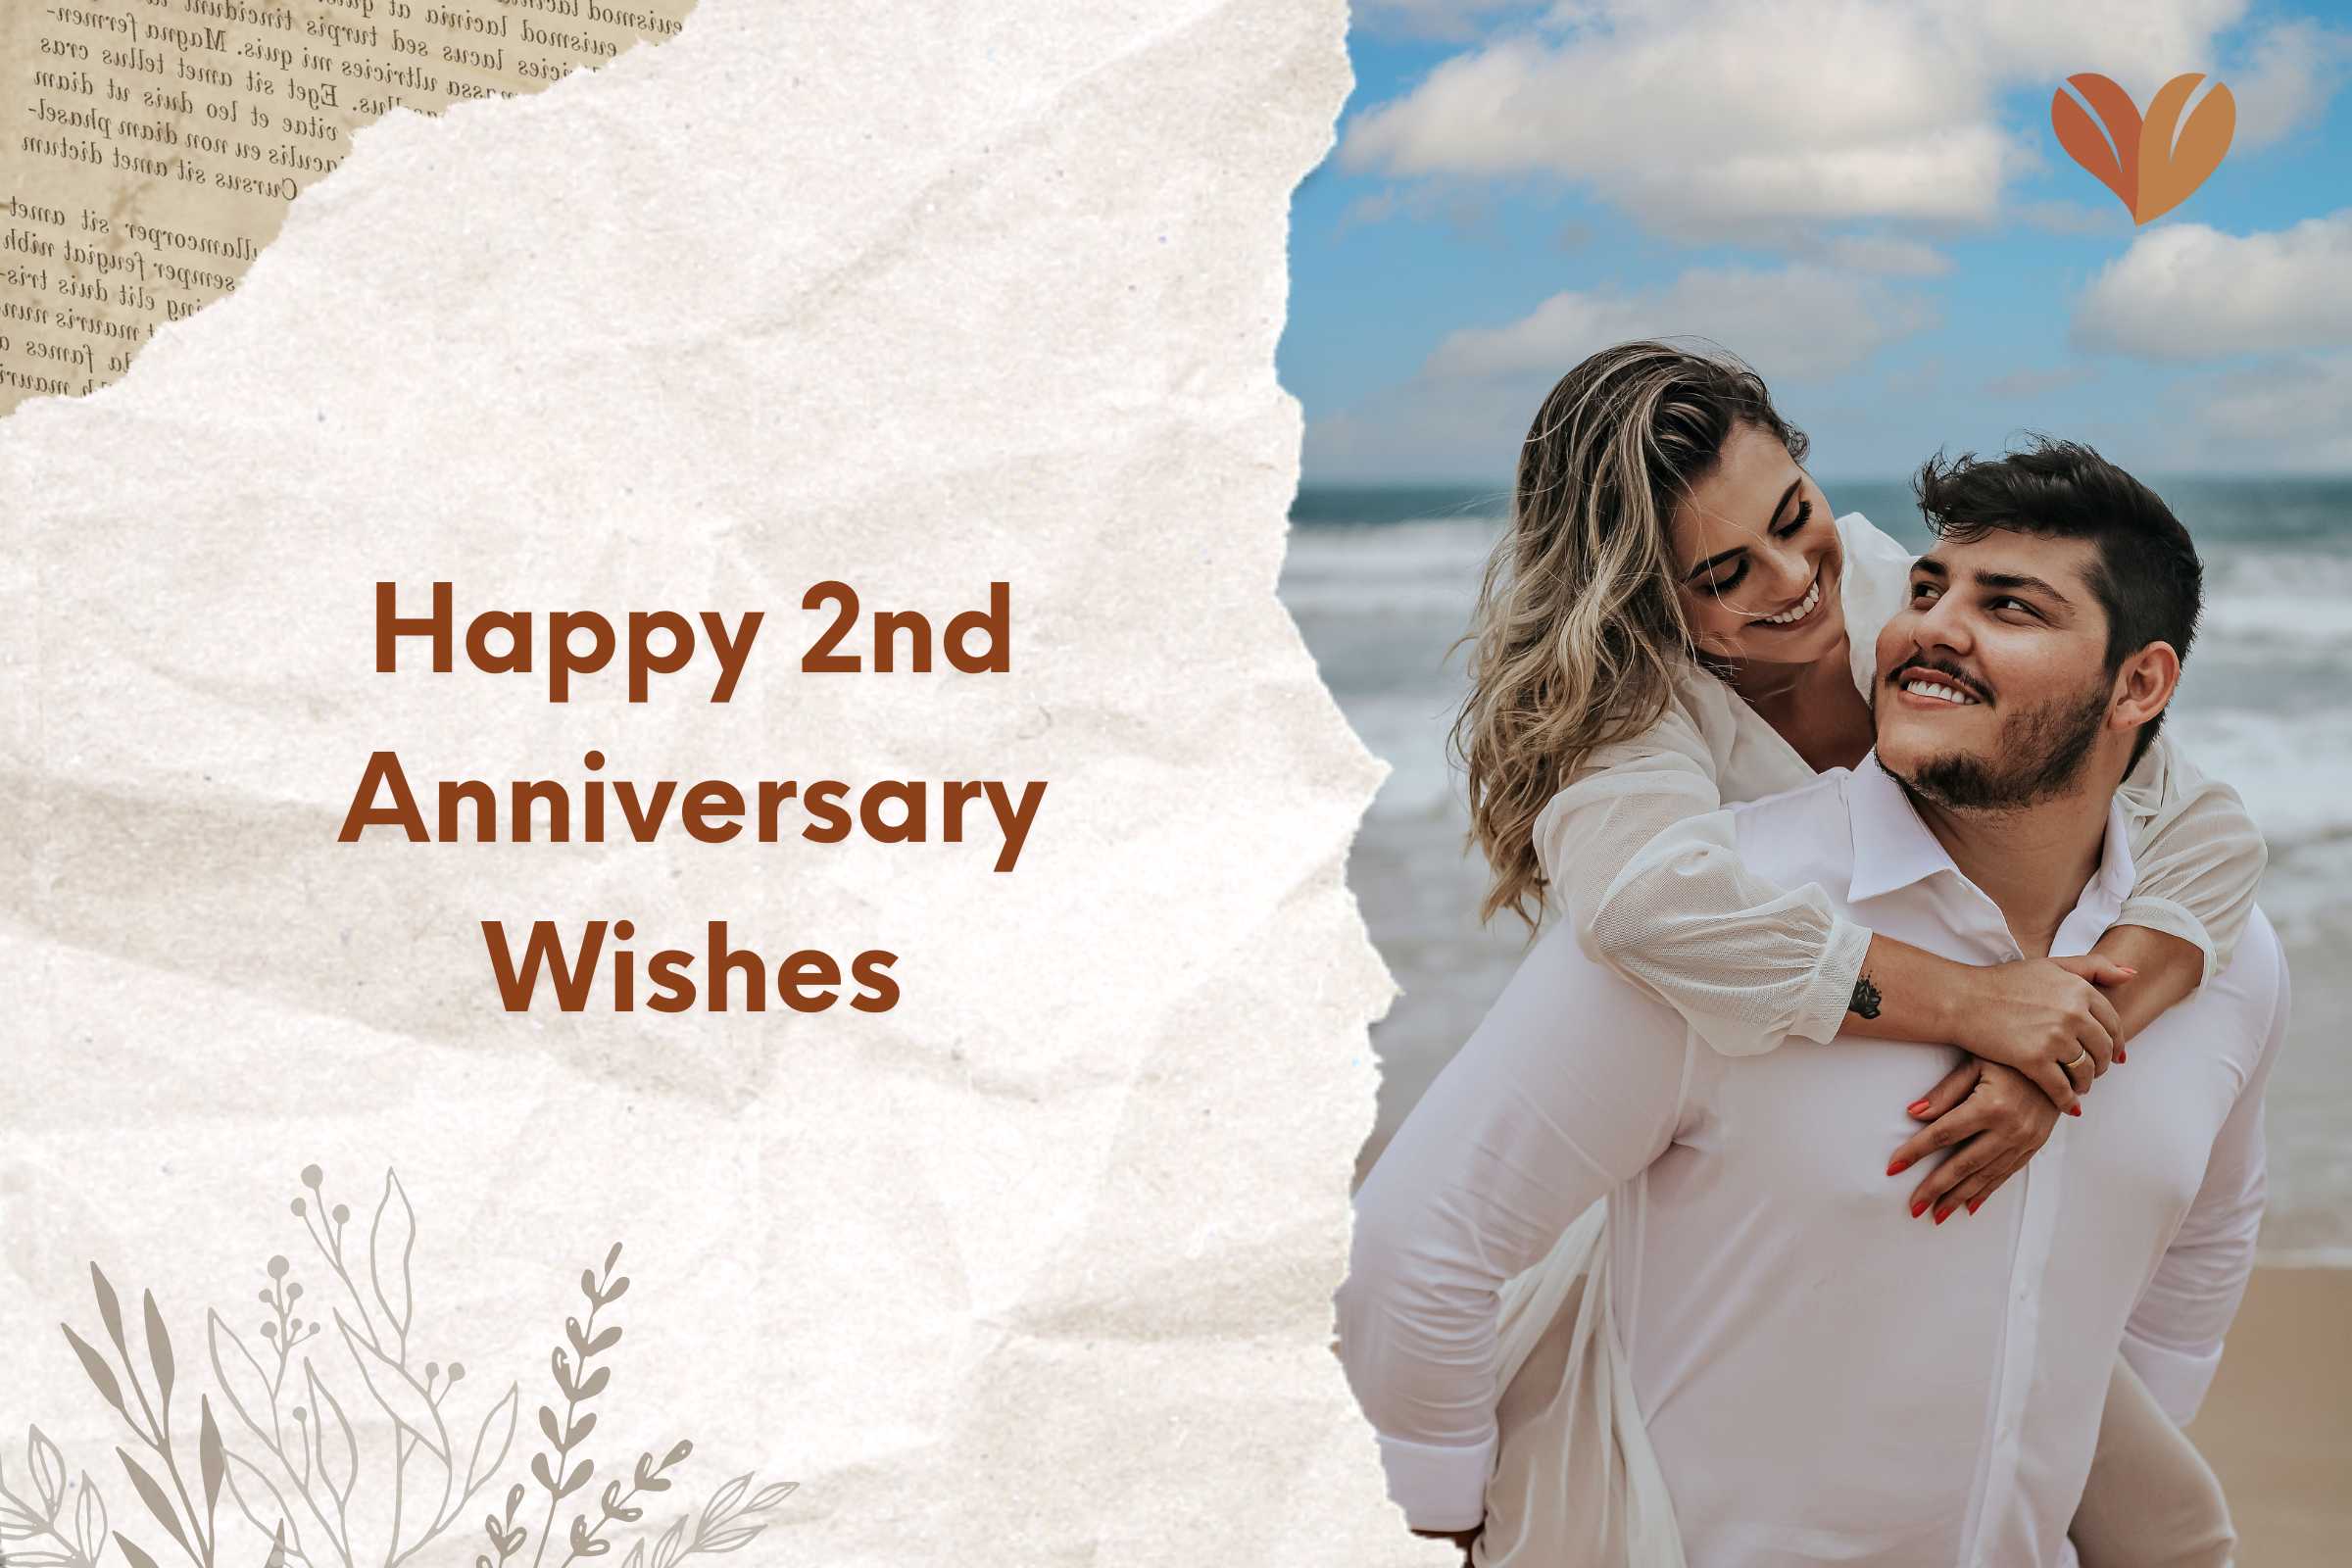 Happy 2nd Anniversary Wishes, Messages and Quotes